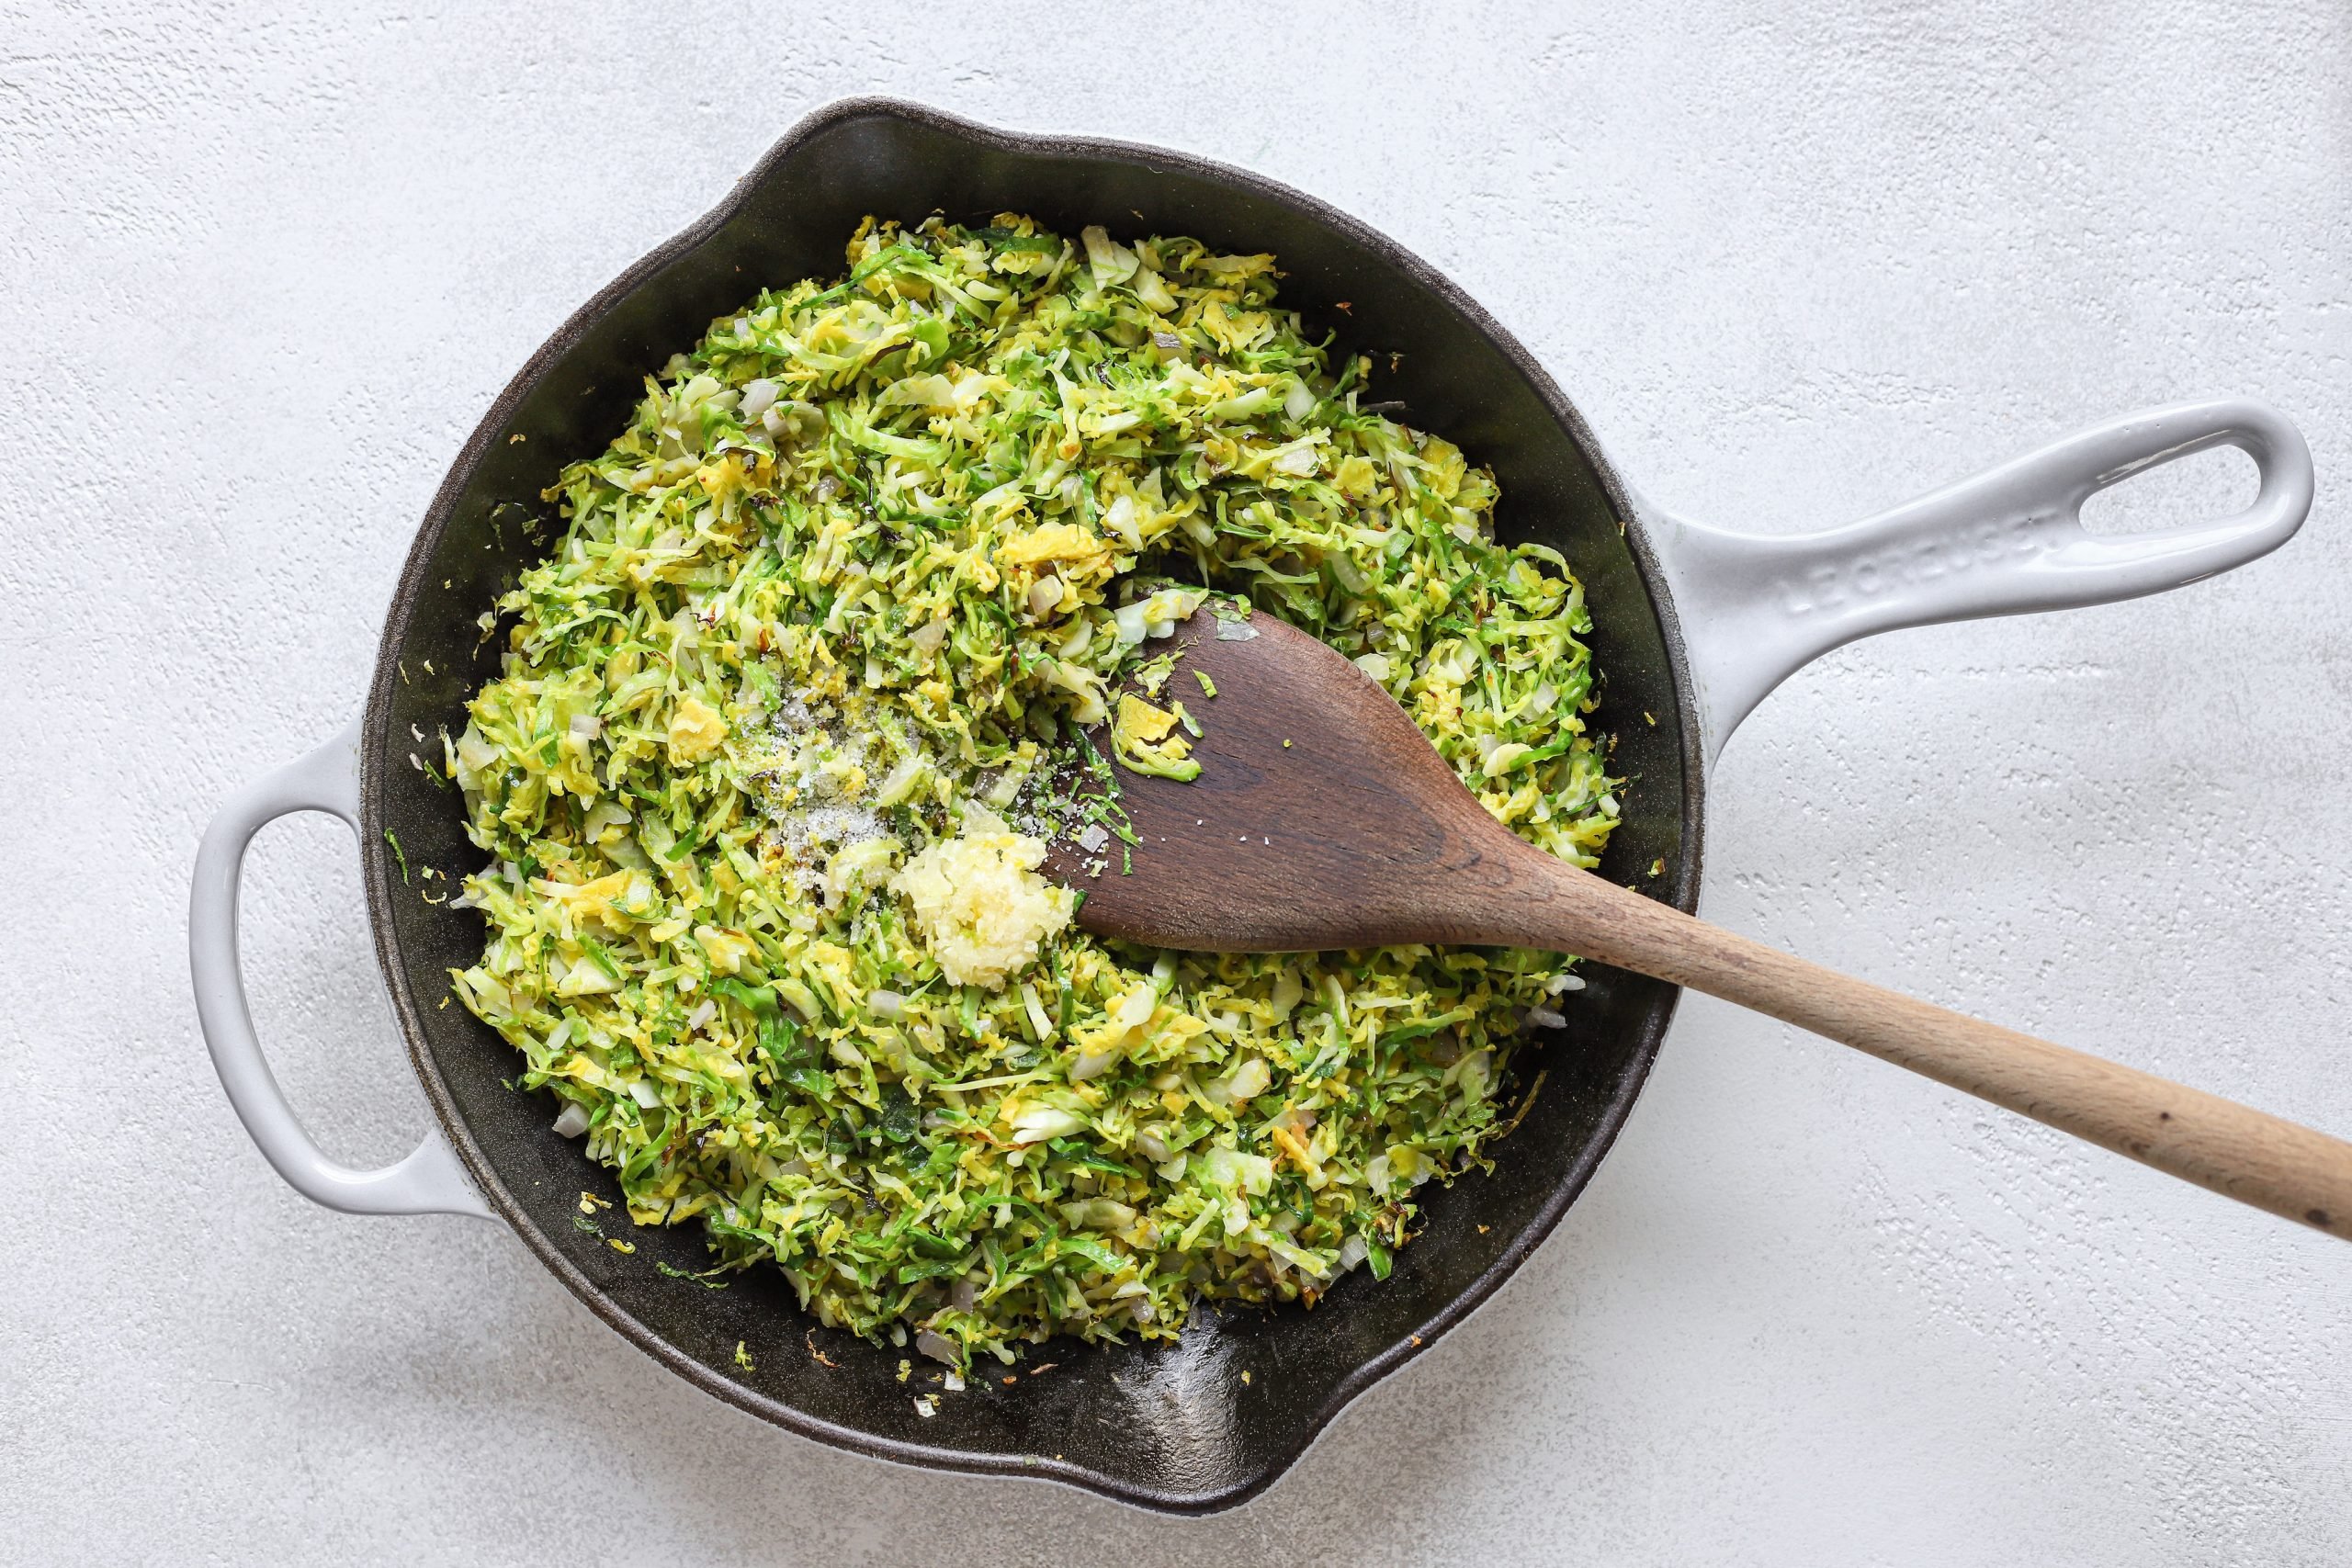 Le Creuset pan filled with finely chopped (shaved) Brussels sprouts and minced garlic on top. Wooden spoon in the shaved Brussels sprouts (as if stirring).